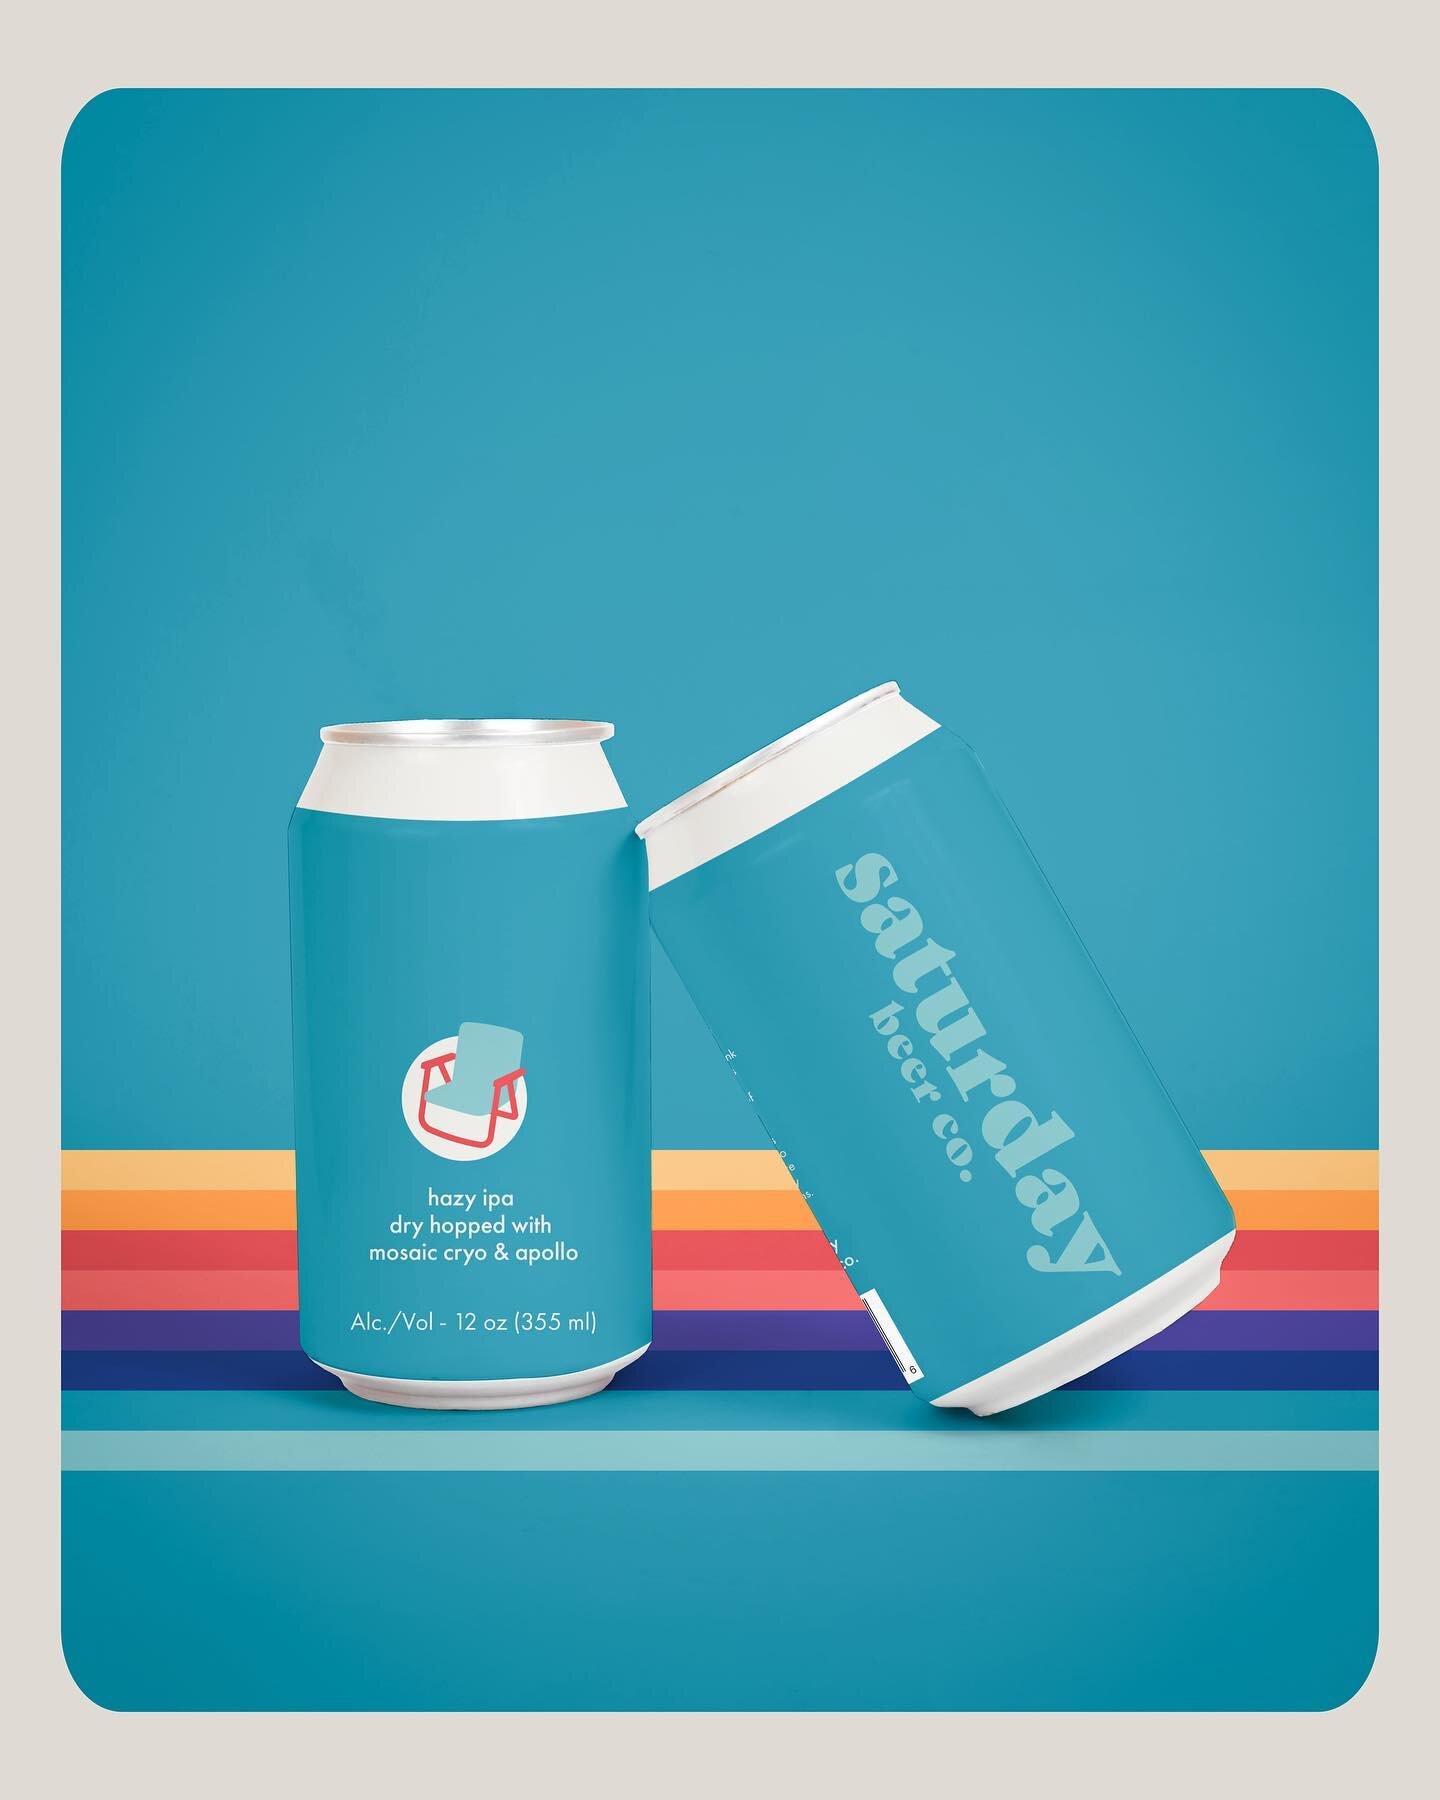 Logo, color palette, layout and all the brand things for Saturday Beer Co. This was a fun one. The goal was to create a warm, fuzzy vintage inspired look while feeling contemporary and eye catching. My favorite element has to be the icon. Once I had 